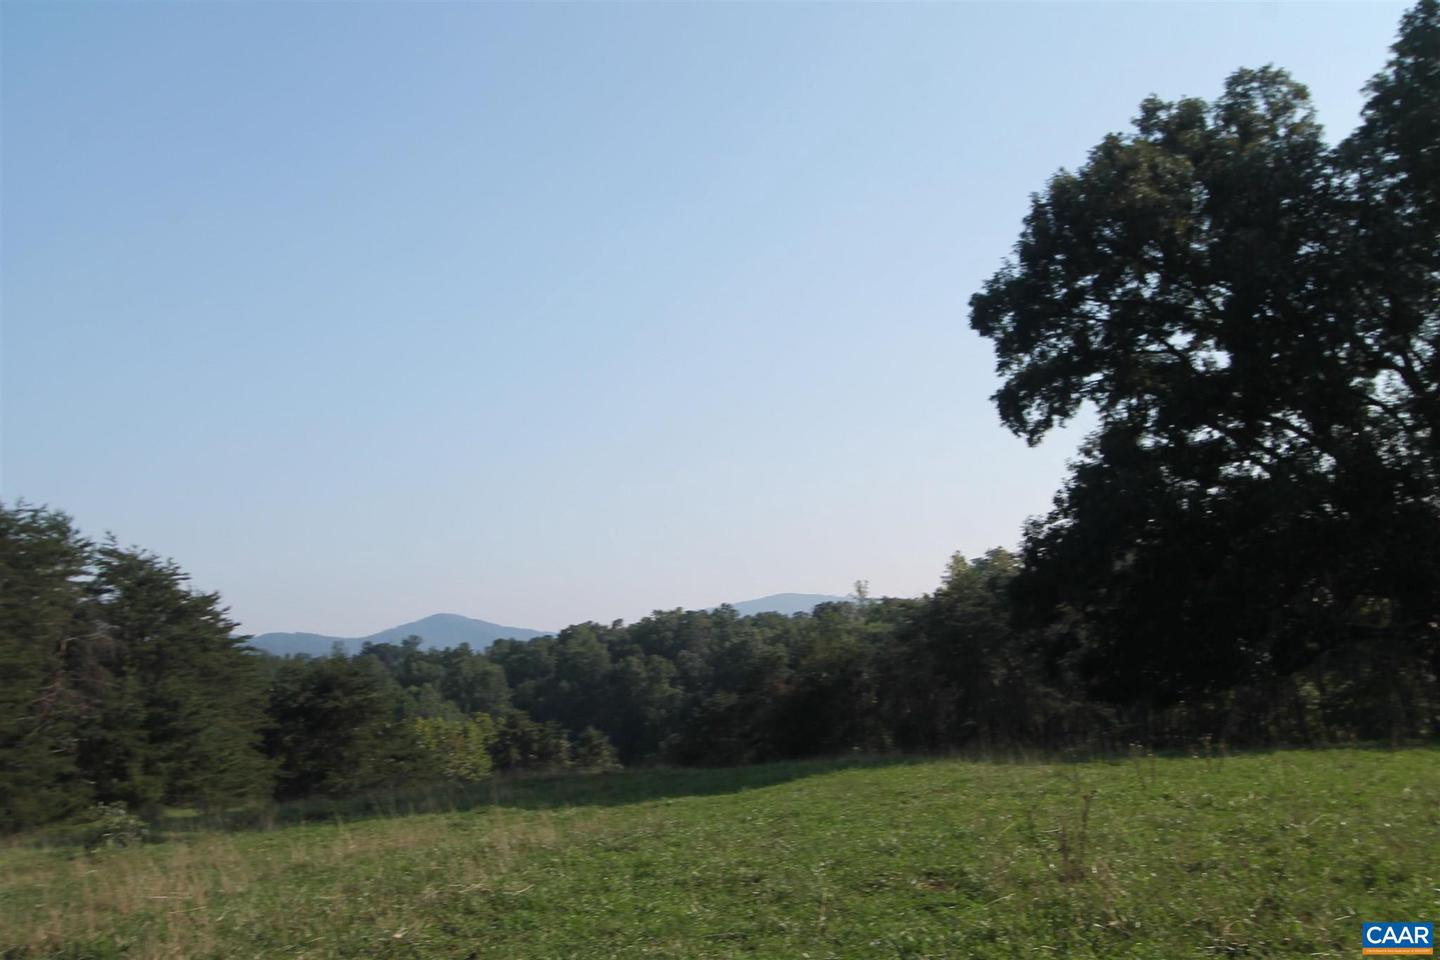 0 MIDWAY RD #048A0, CHARLOTTESVILLE, Virginia 22903, ,Farm,For sale,0 MIDWAY RD #048A0,621439 MLS # 621439